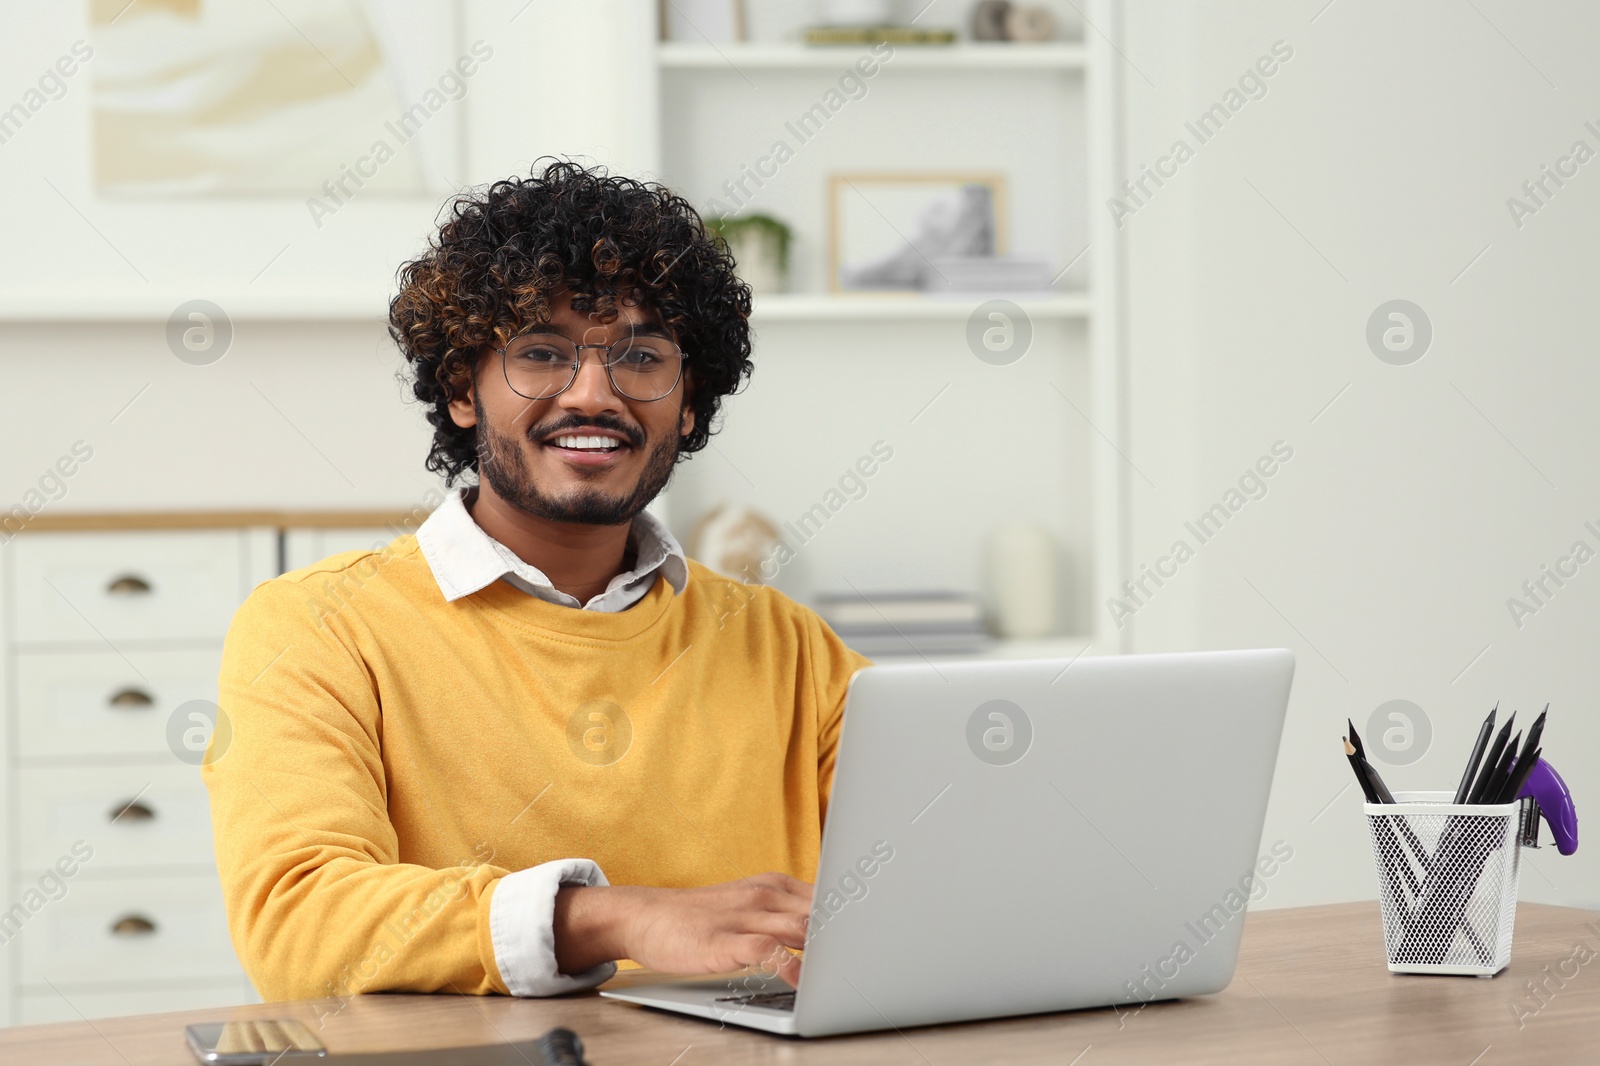 Photo of Handsome smiling man using laptop in room